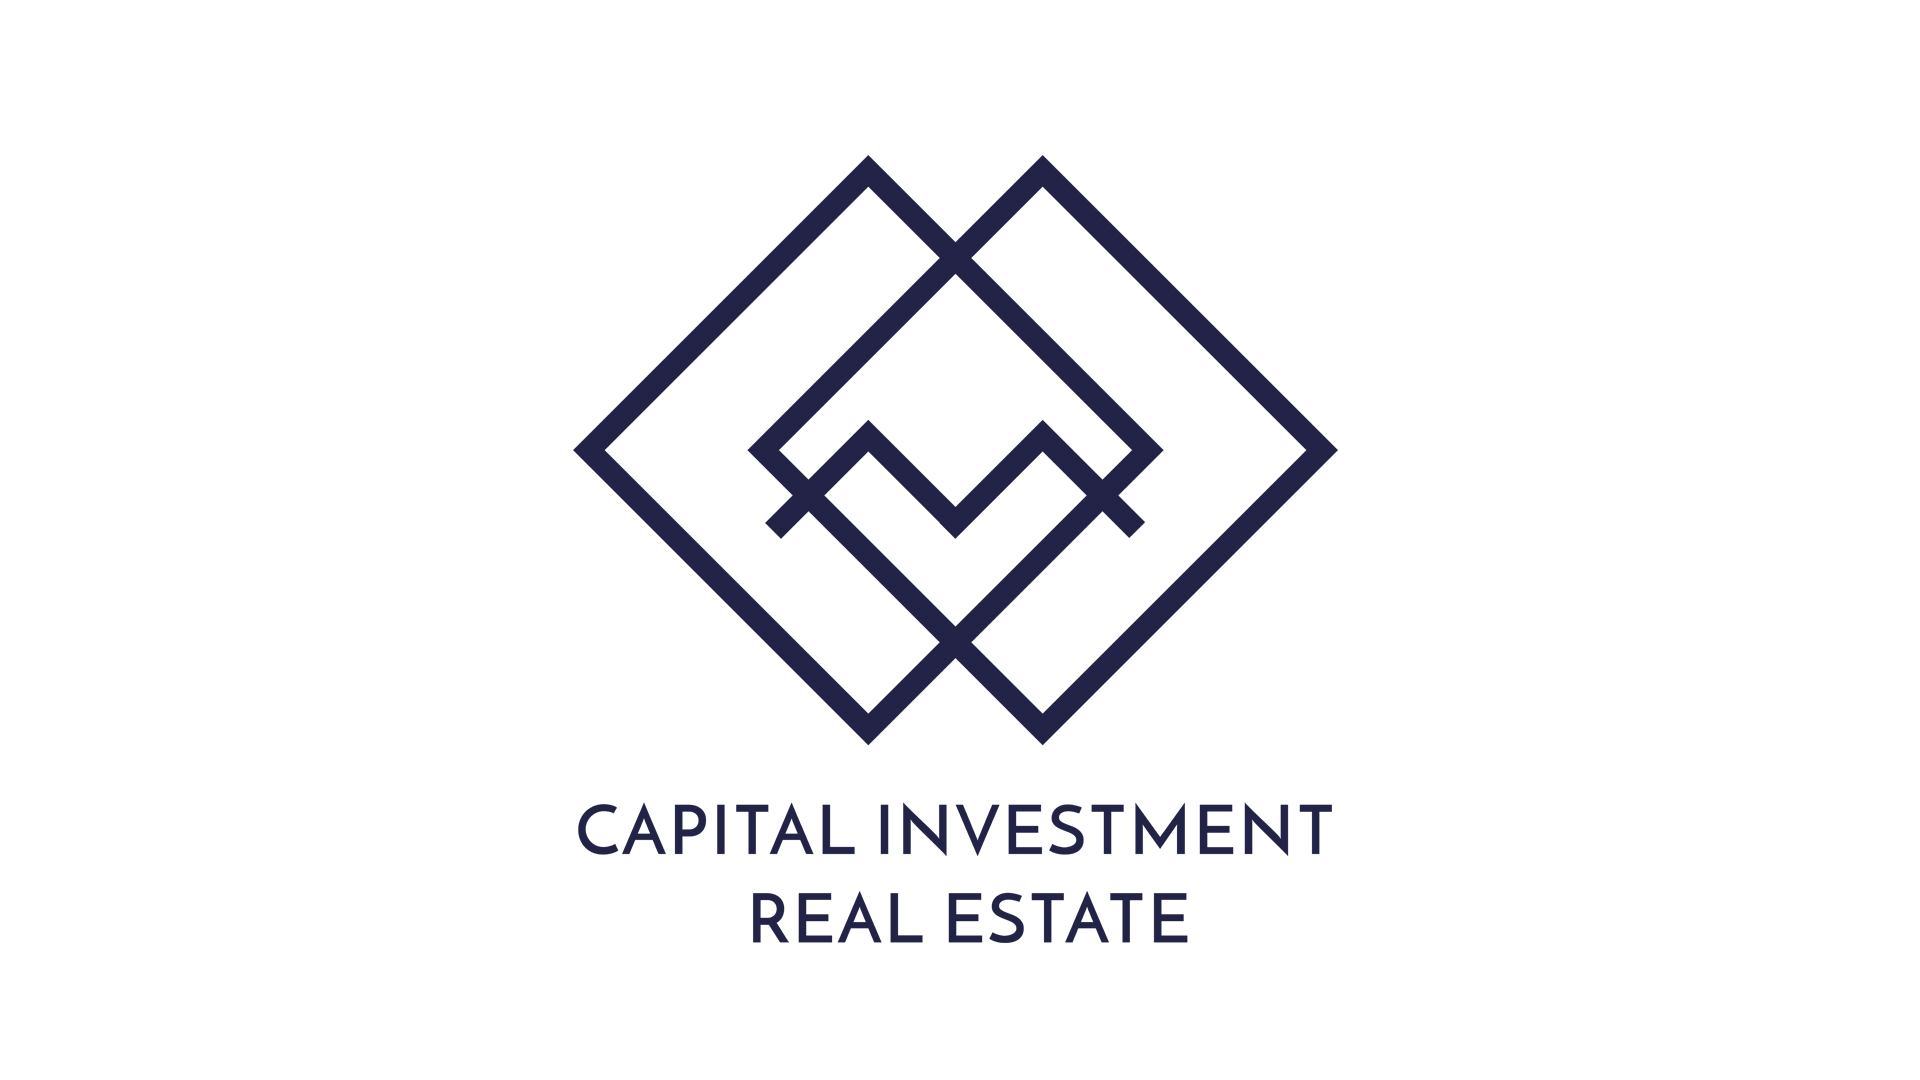 Capital Investment Logo - Capital Investment Real Estate